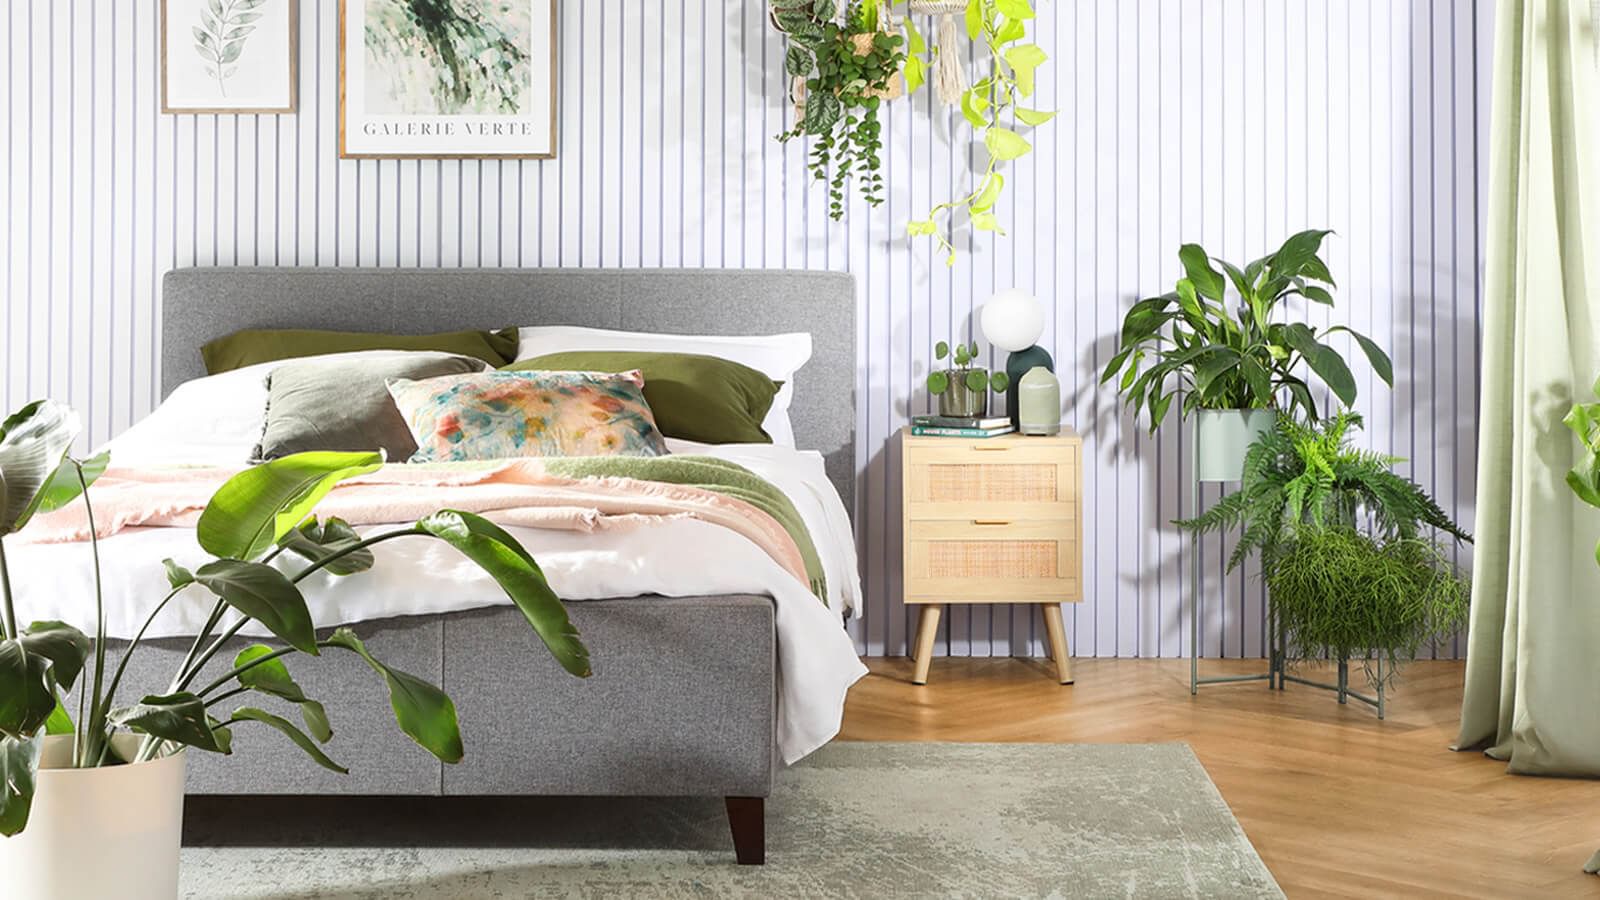 Using biophilic design in your bedroom for wellbeing